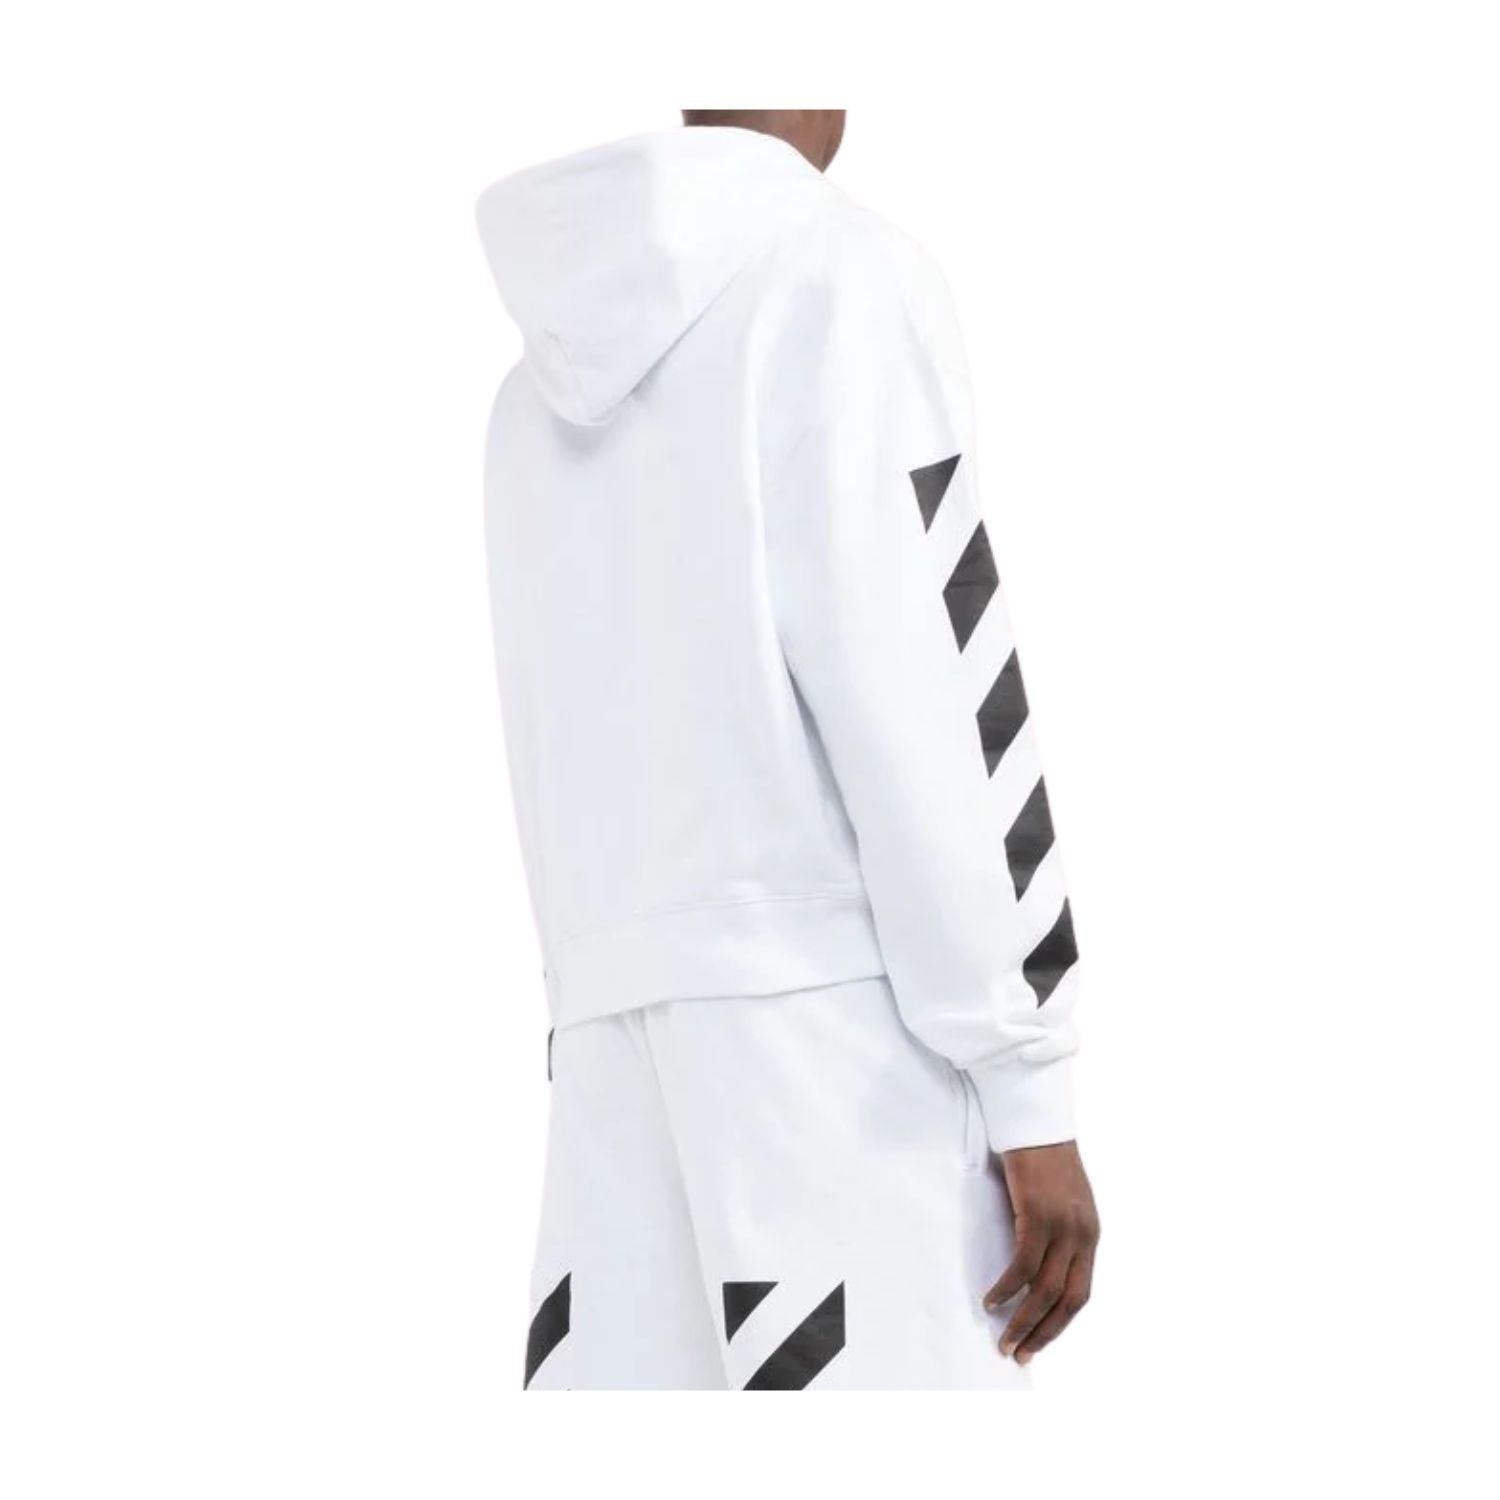 Off-white Diag Helvetica Over Hoodie Mens Style : Ombb037c99fle00